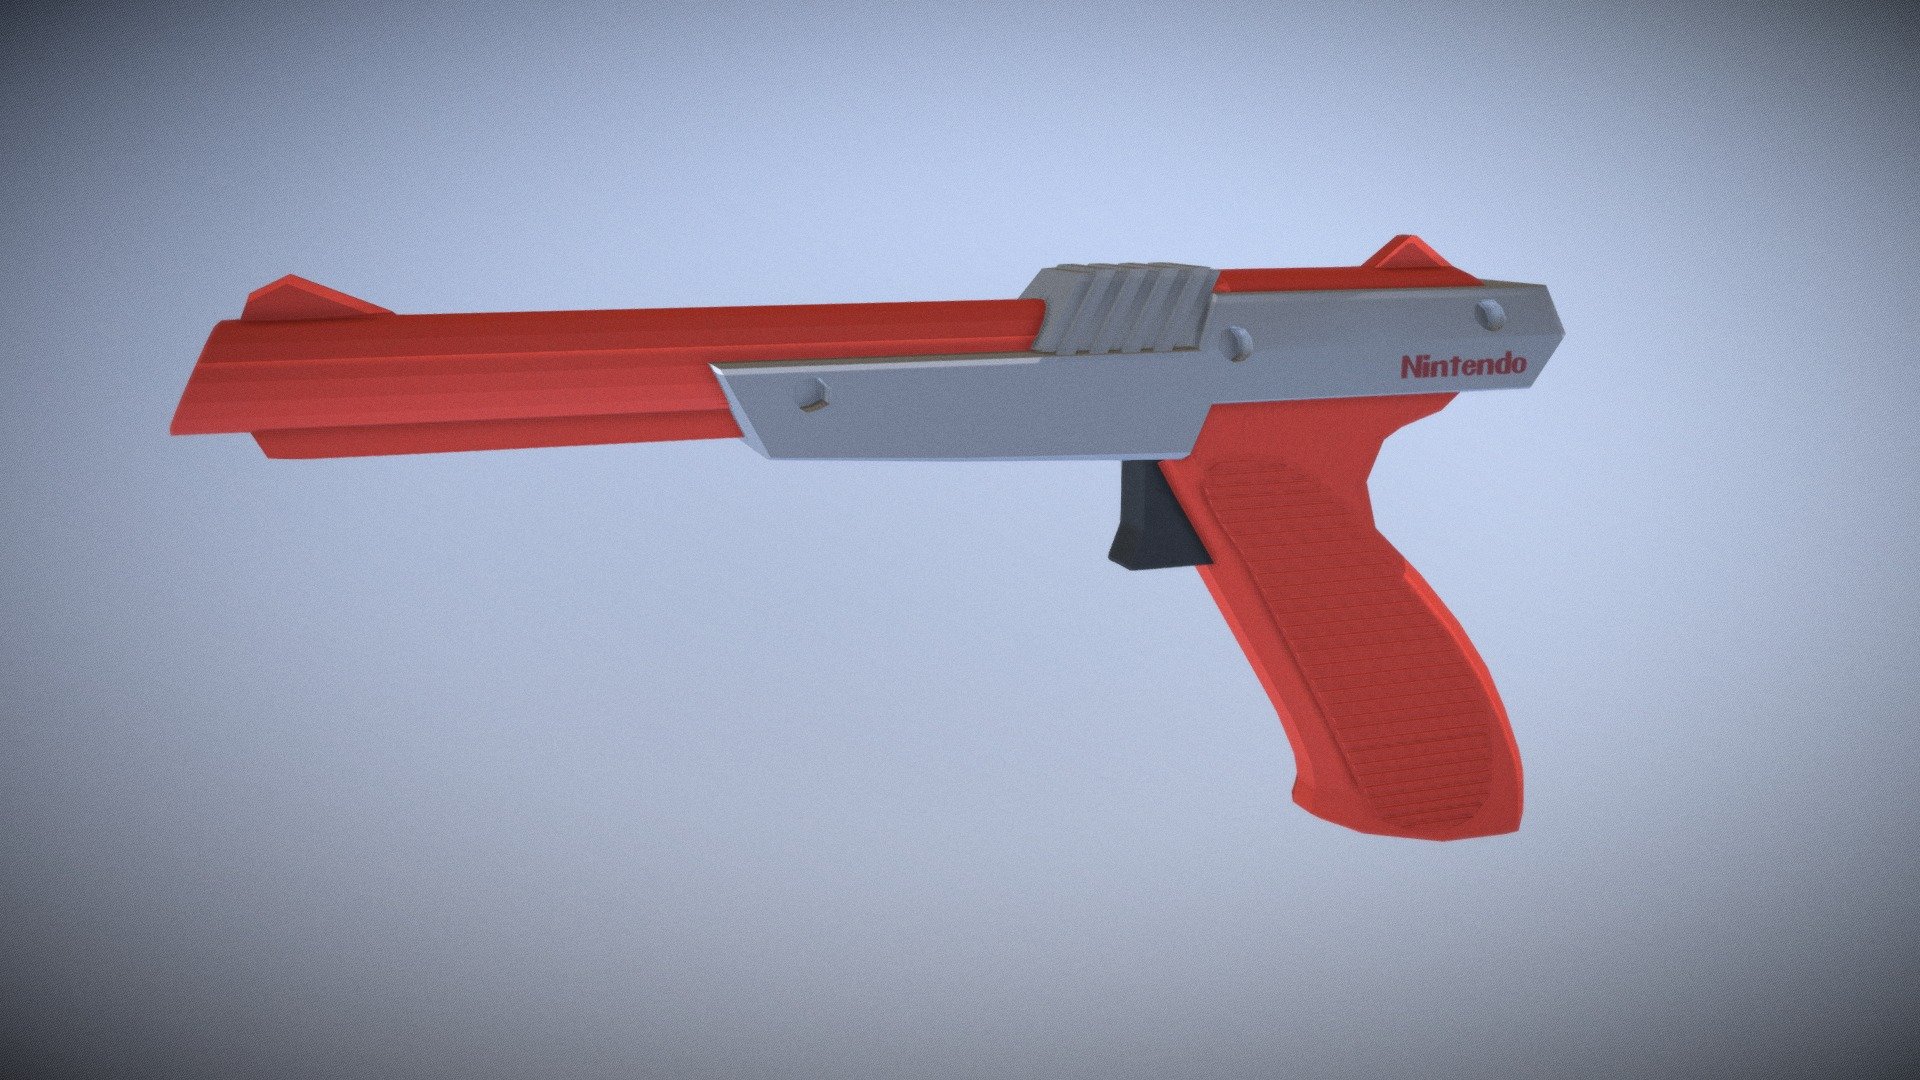 The NES Zapper, also known as The Gun or Beam Gun in Japan, is an electronic light gun accessory for the Nintendo Entertainment System (NES) and the Japanese Famicom 3d model